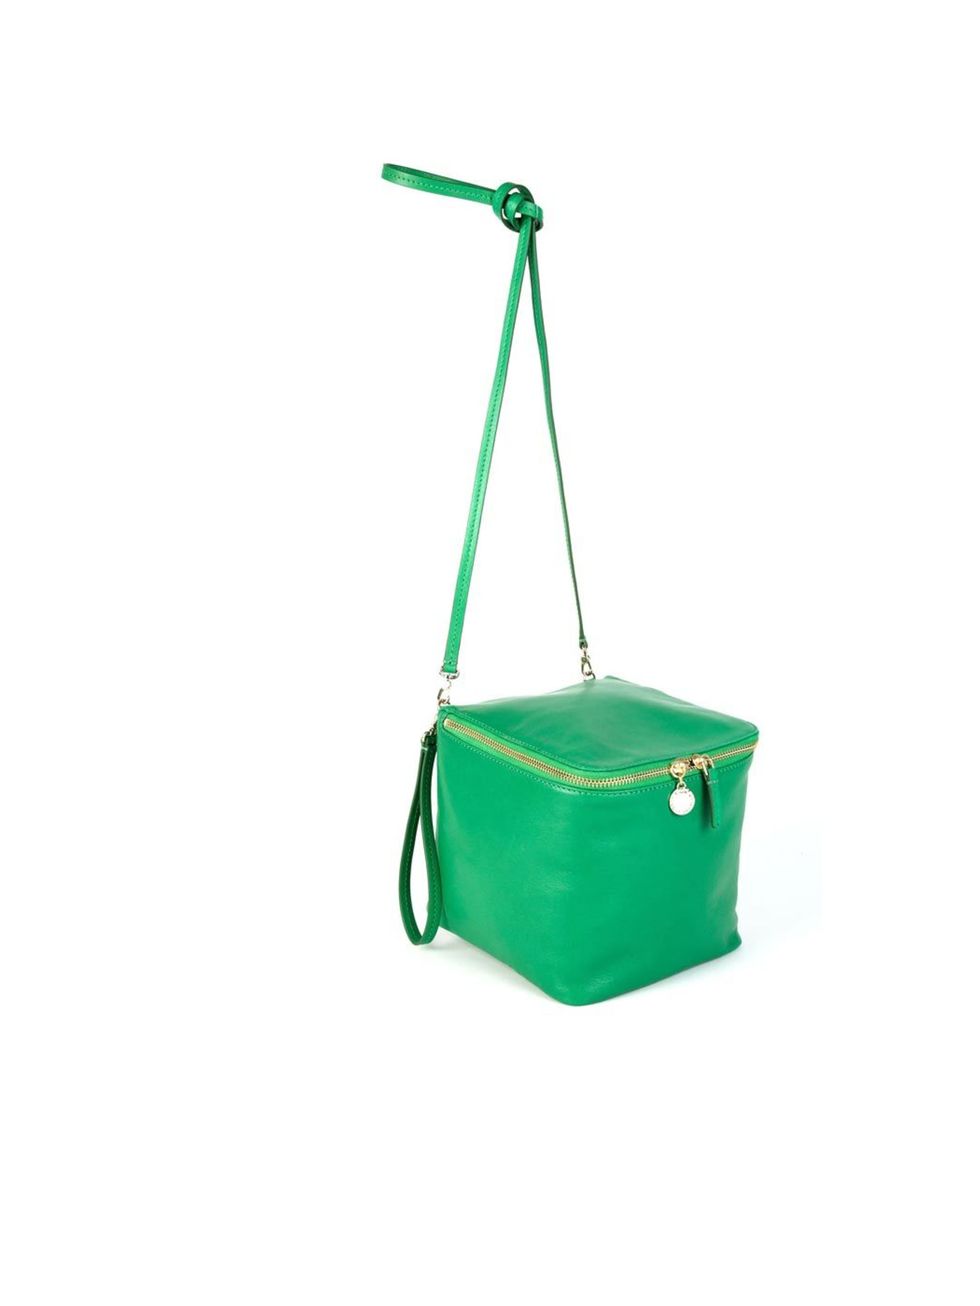 <p>Marc by Marc Jacobs block party New Kid on the block bag in fresh grass, £160, for stockists call 0207 408 7050</p>